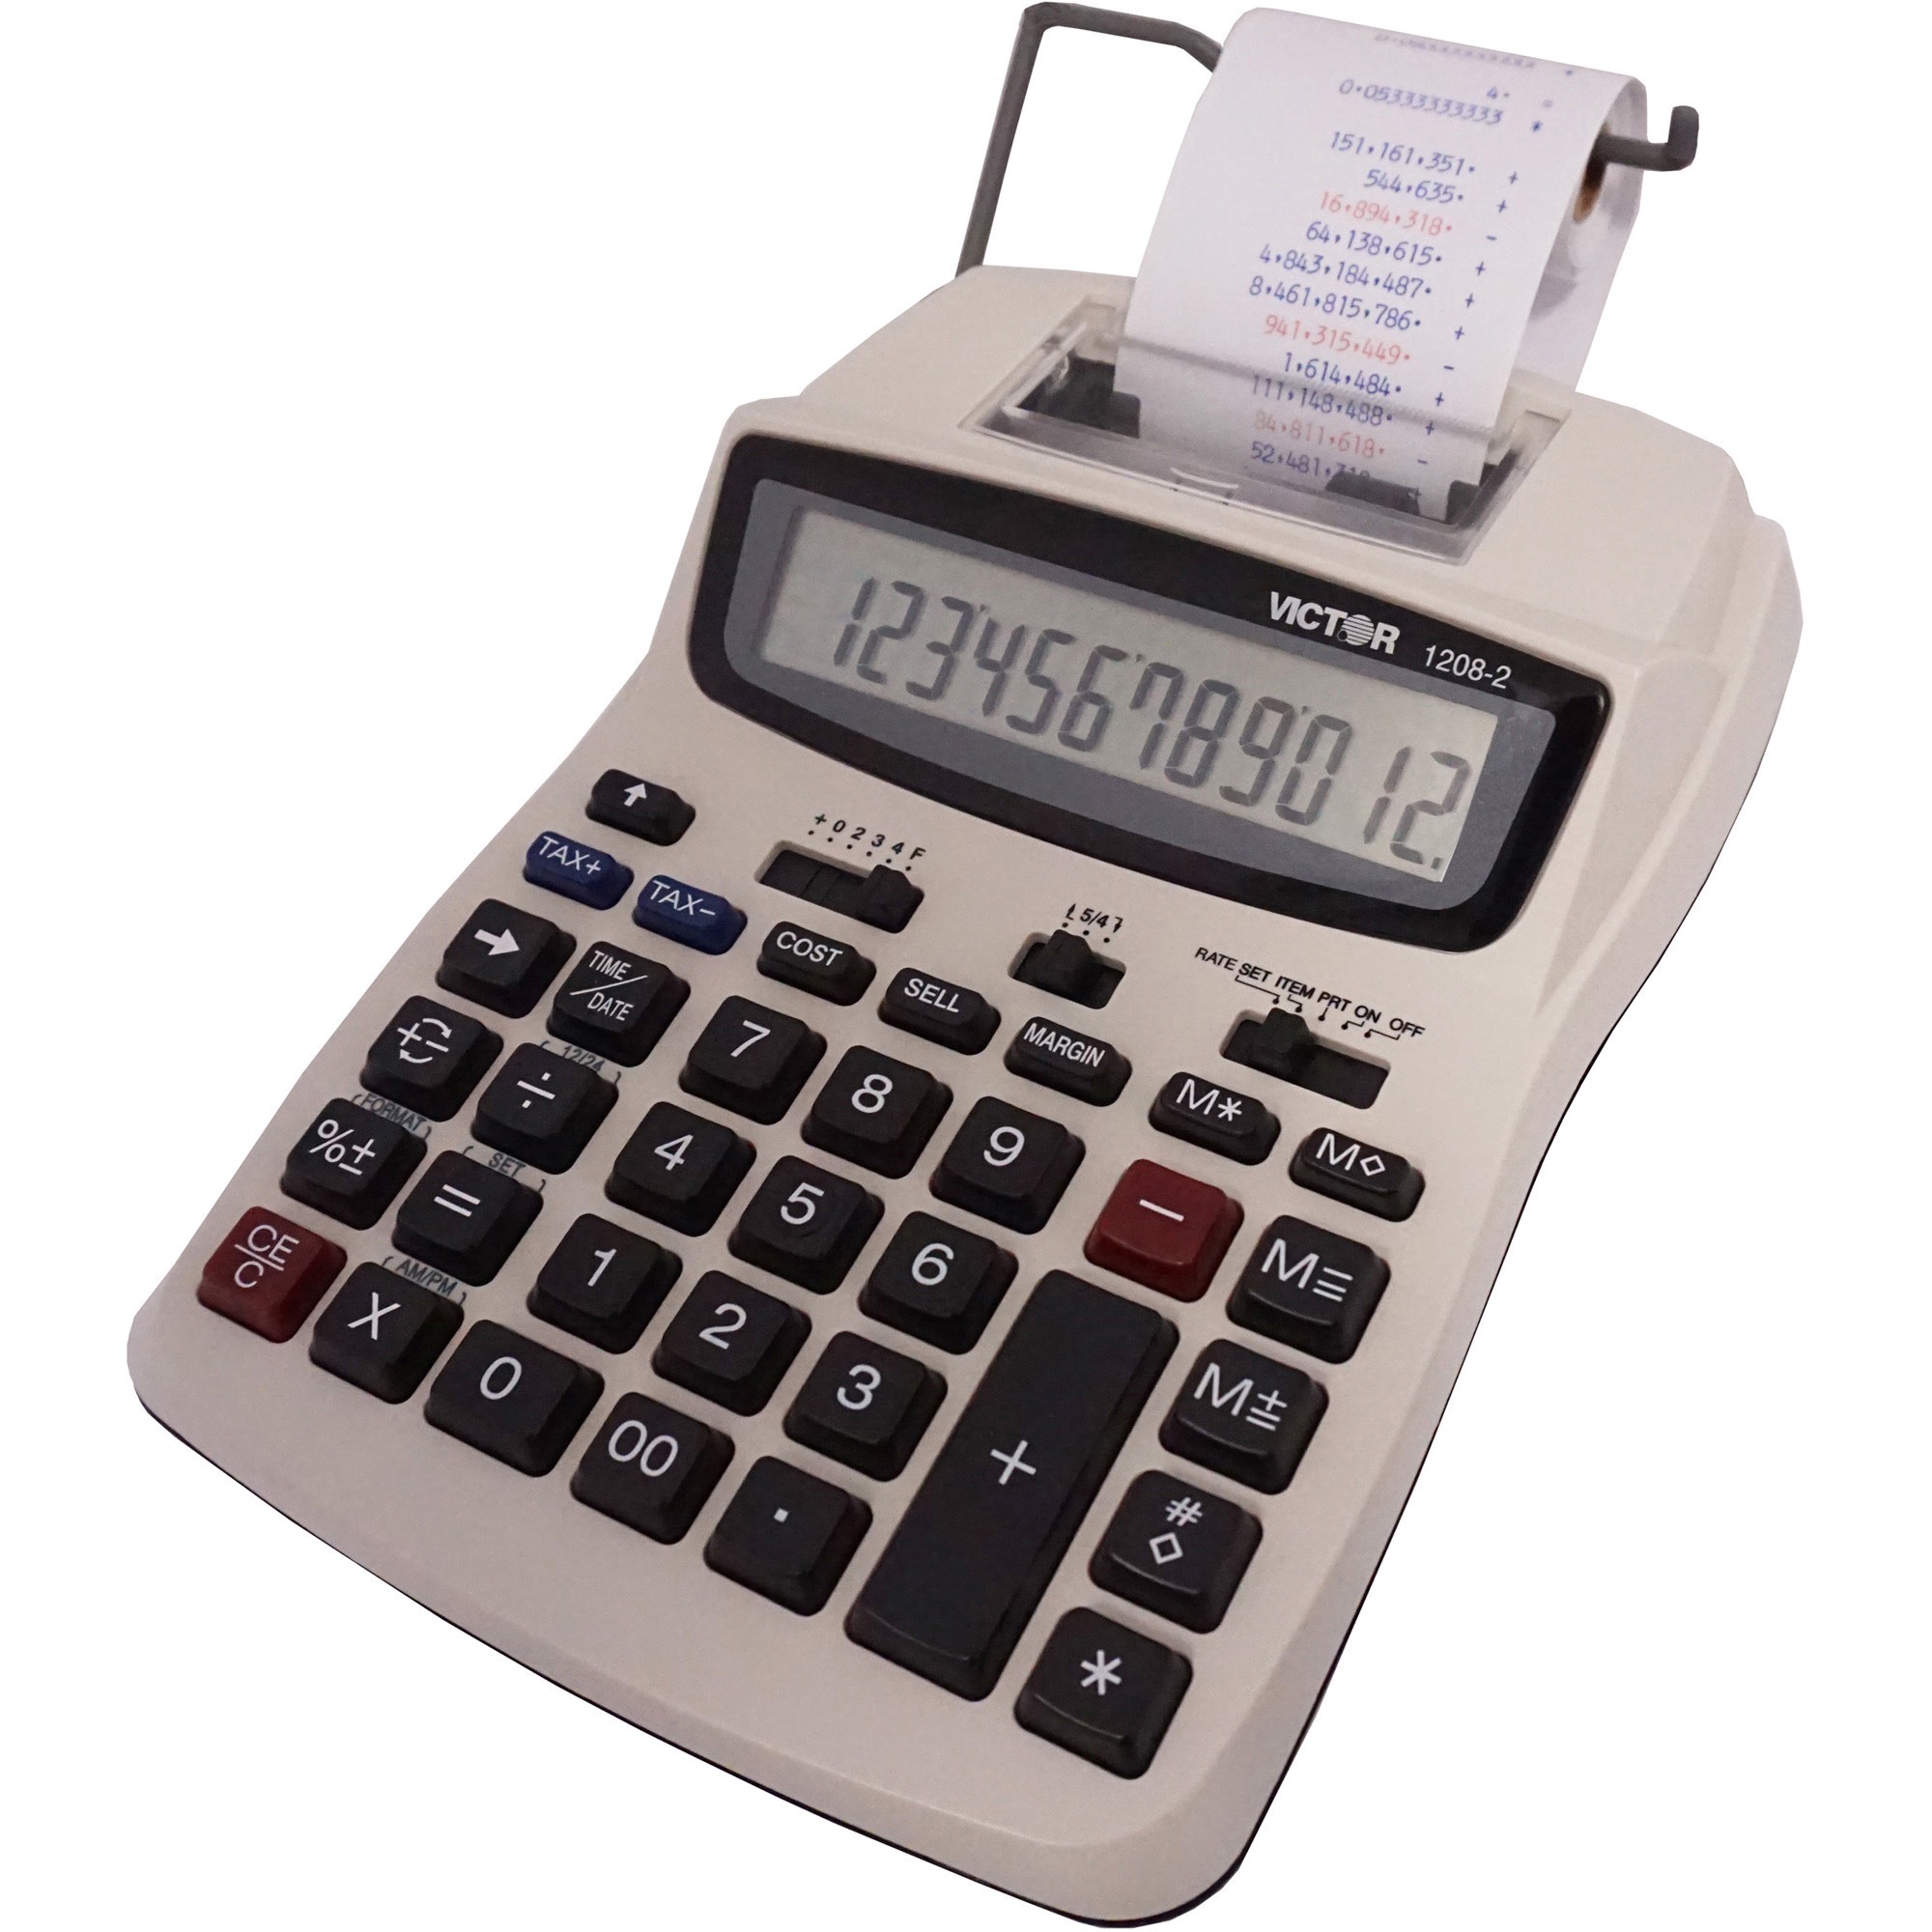 VCT12082 Victor 12082 Printing Calculator 